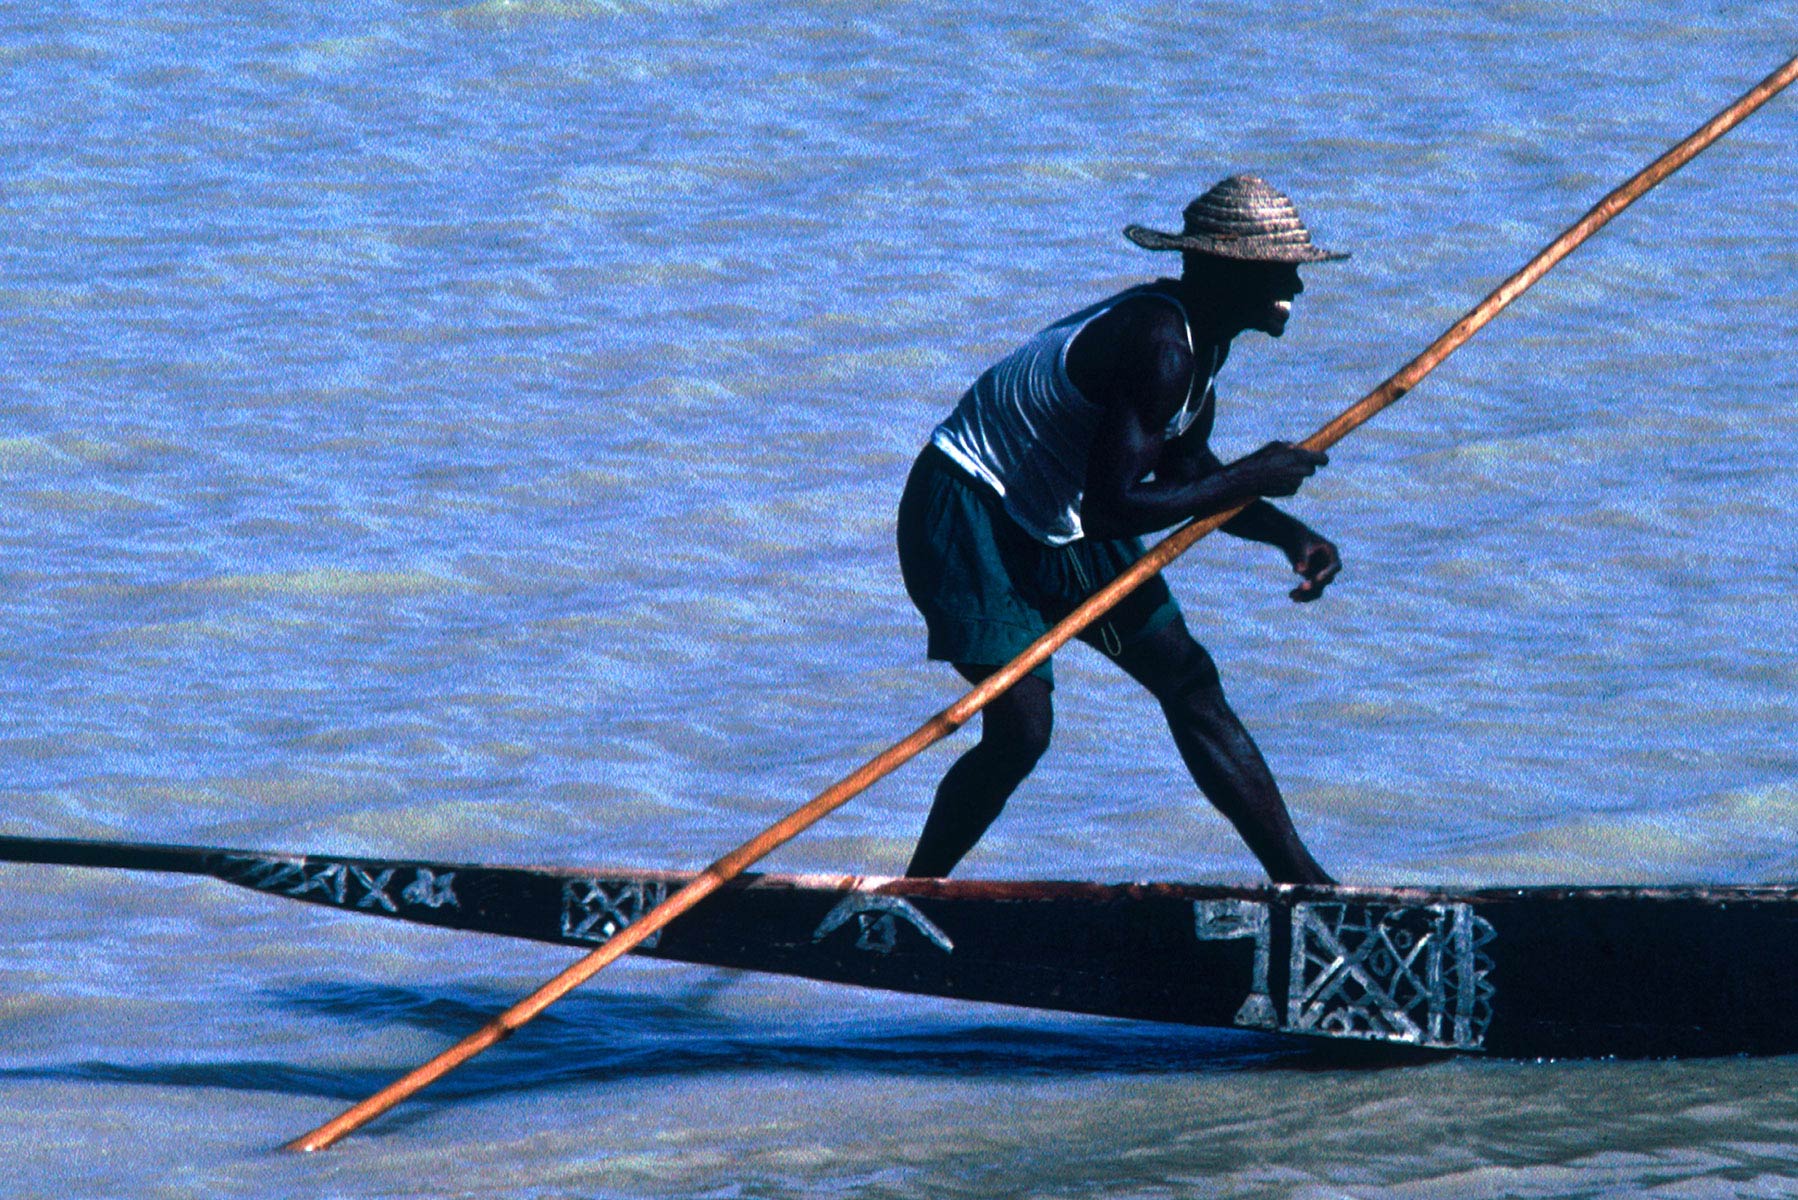 Pirogue on the Niger River